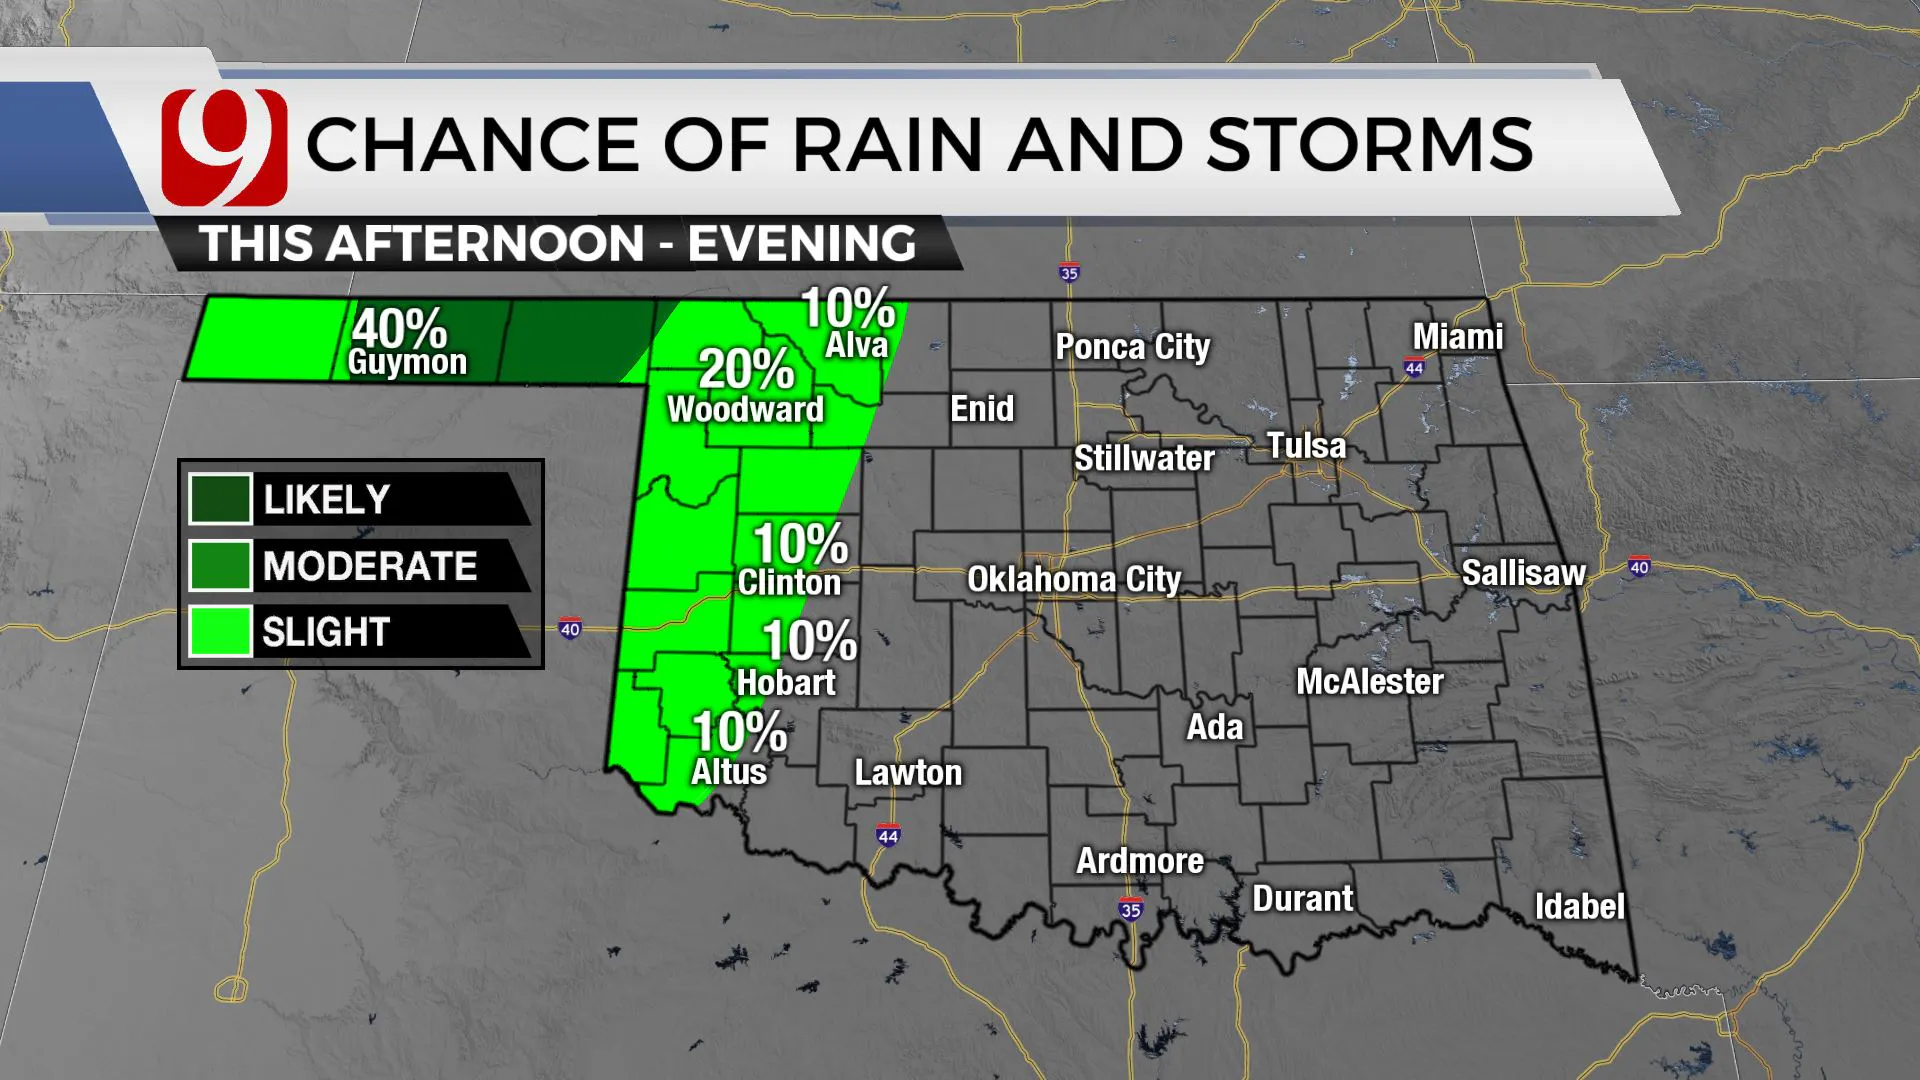 Chances of rain and storms.